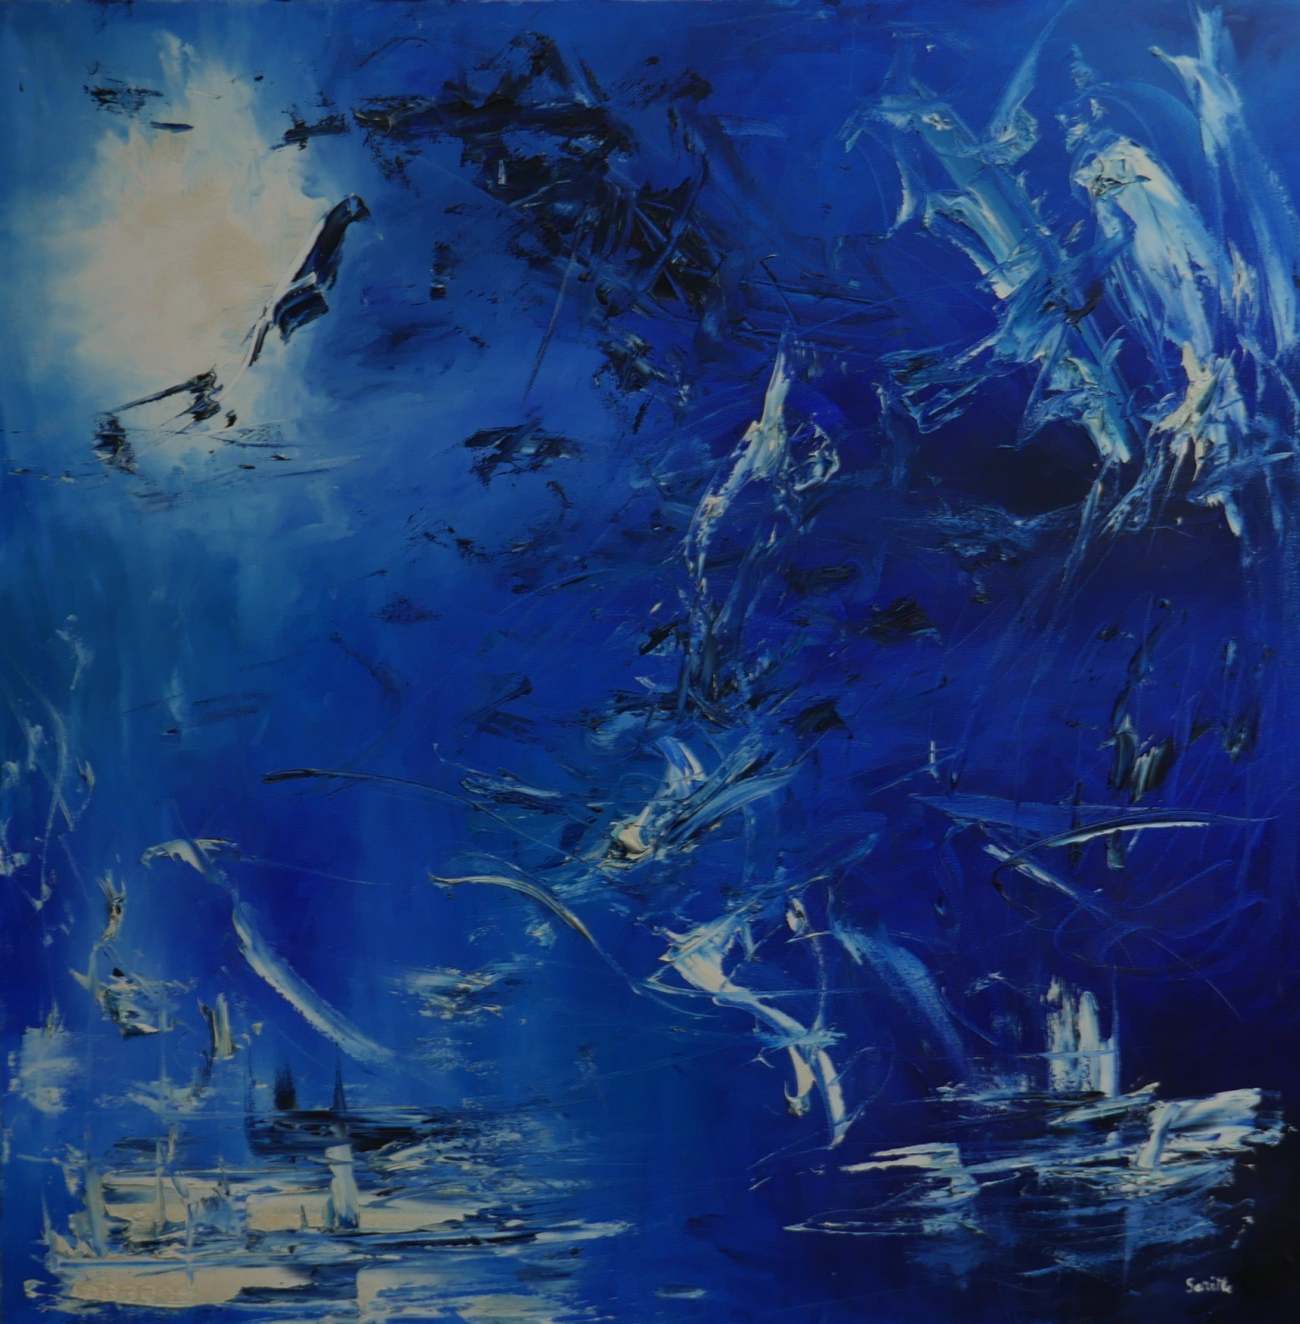 beyond the horizon, 2009 <br> Oil on canvas 80x80